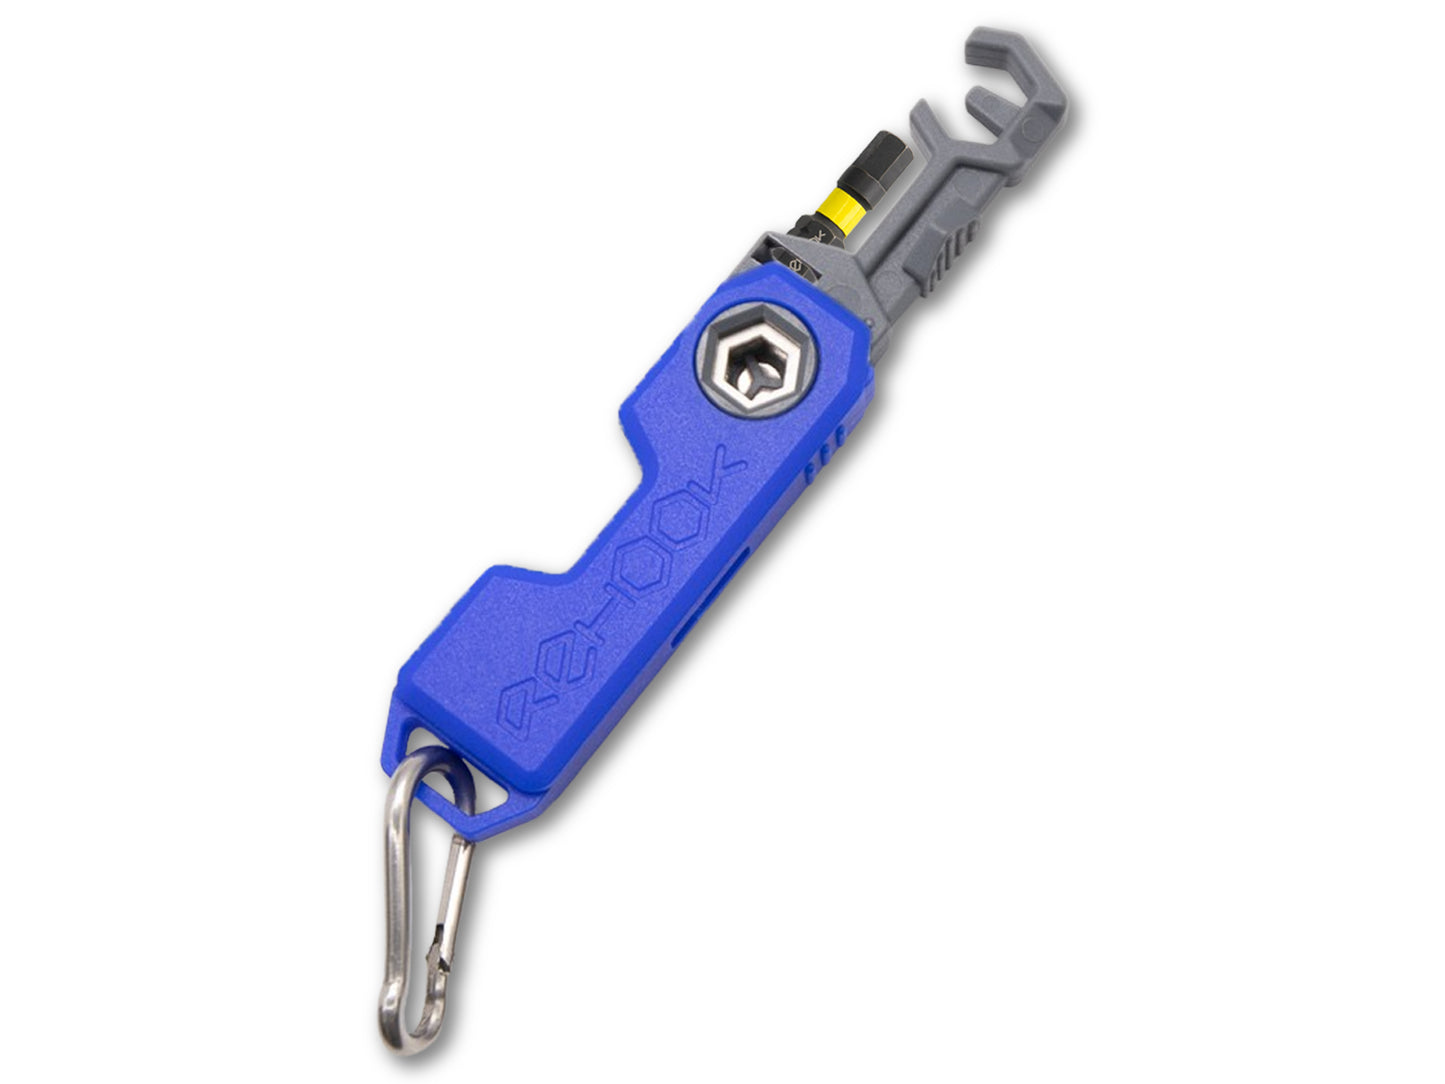 Rehook Mini Cycling Multi-Tool - Build Your Own